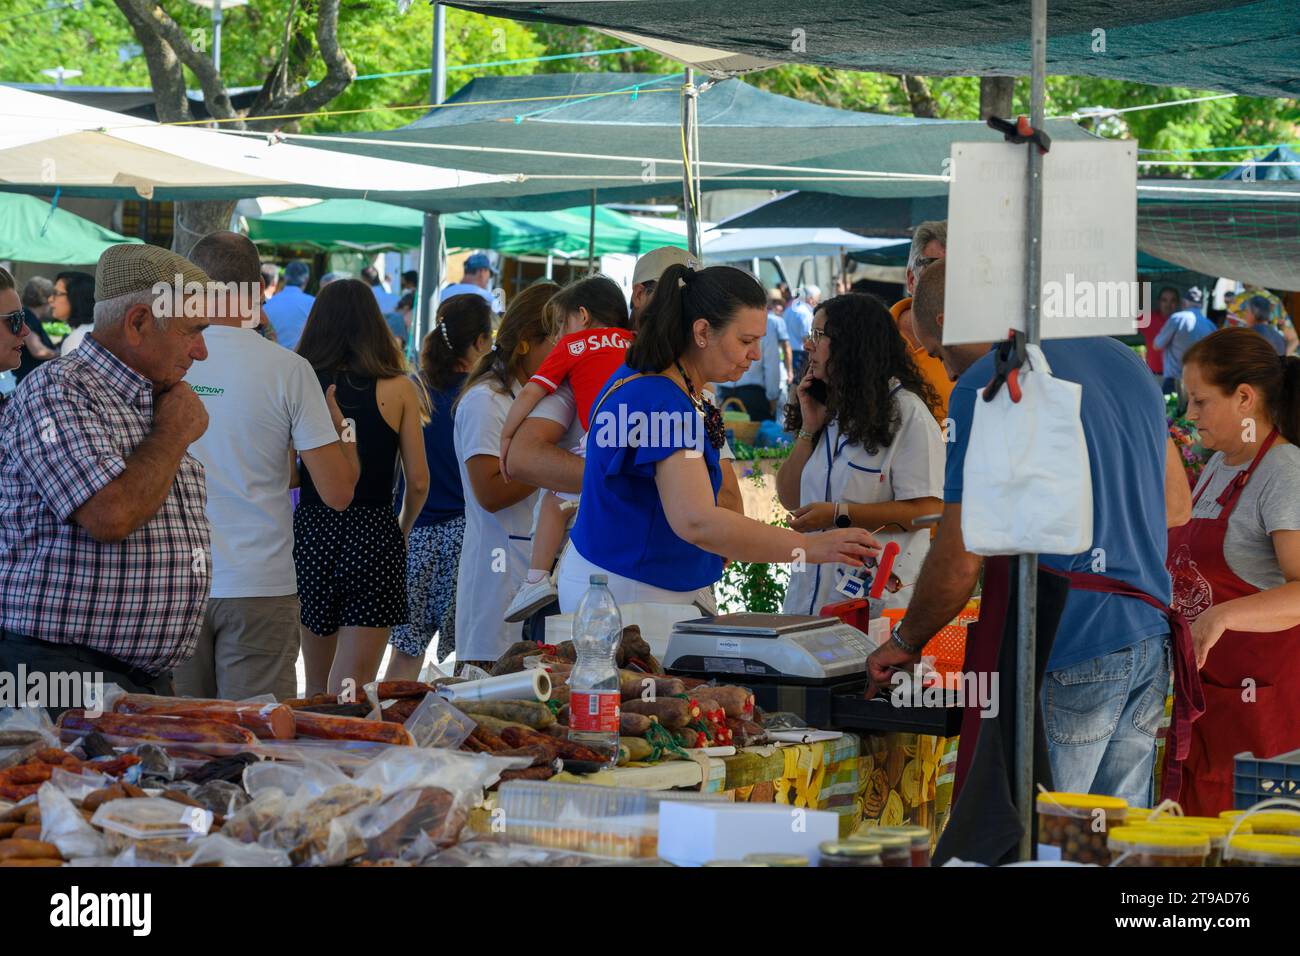 A stall selling cured meats and local cheeses at the Weekly Saturday farmer's Flea Market, Estremoz, Alentejo, Portugal Stock Photo